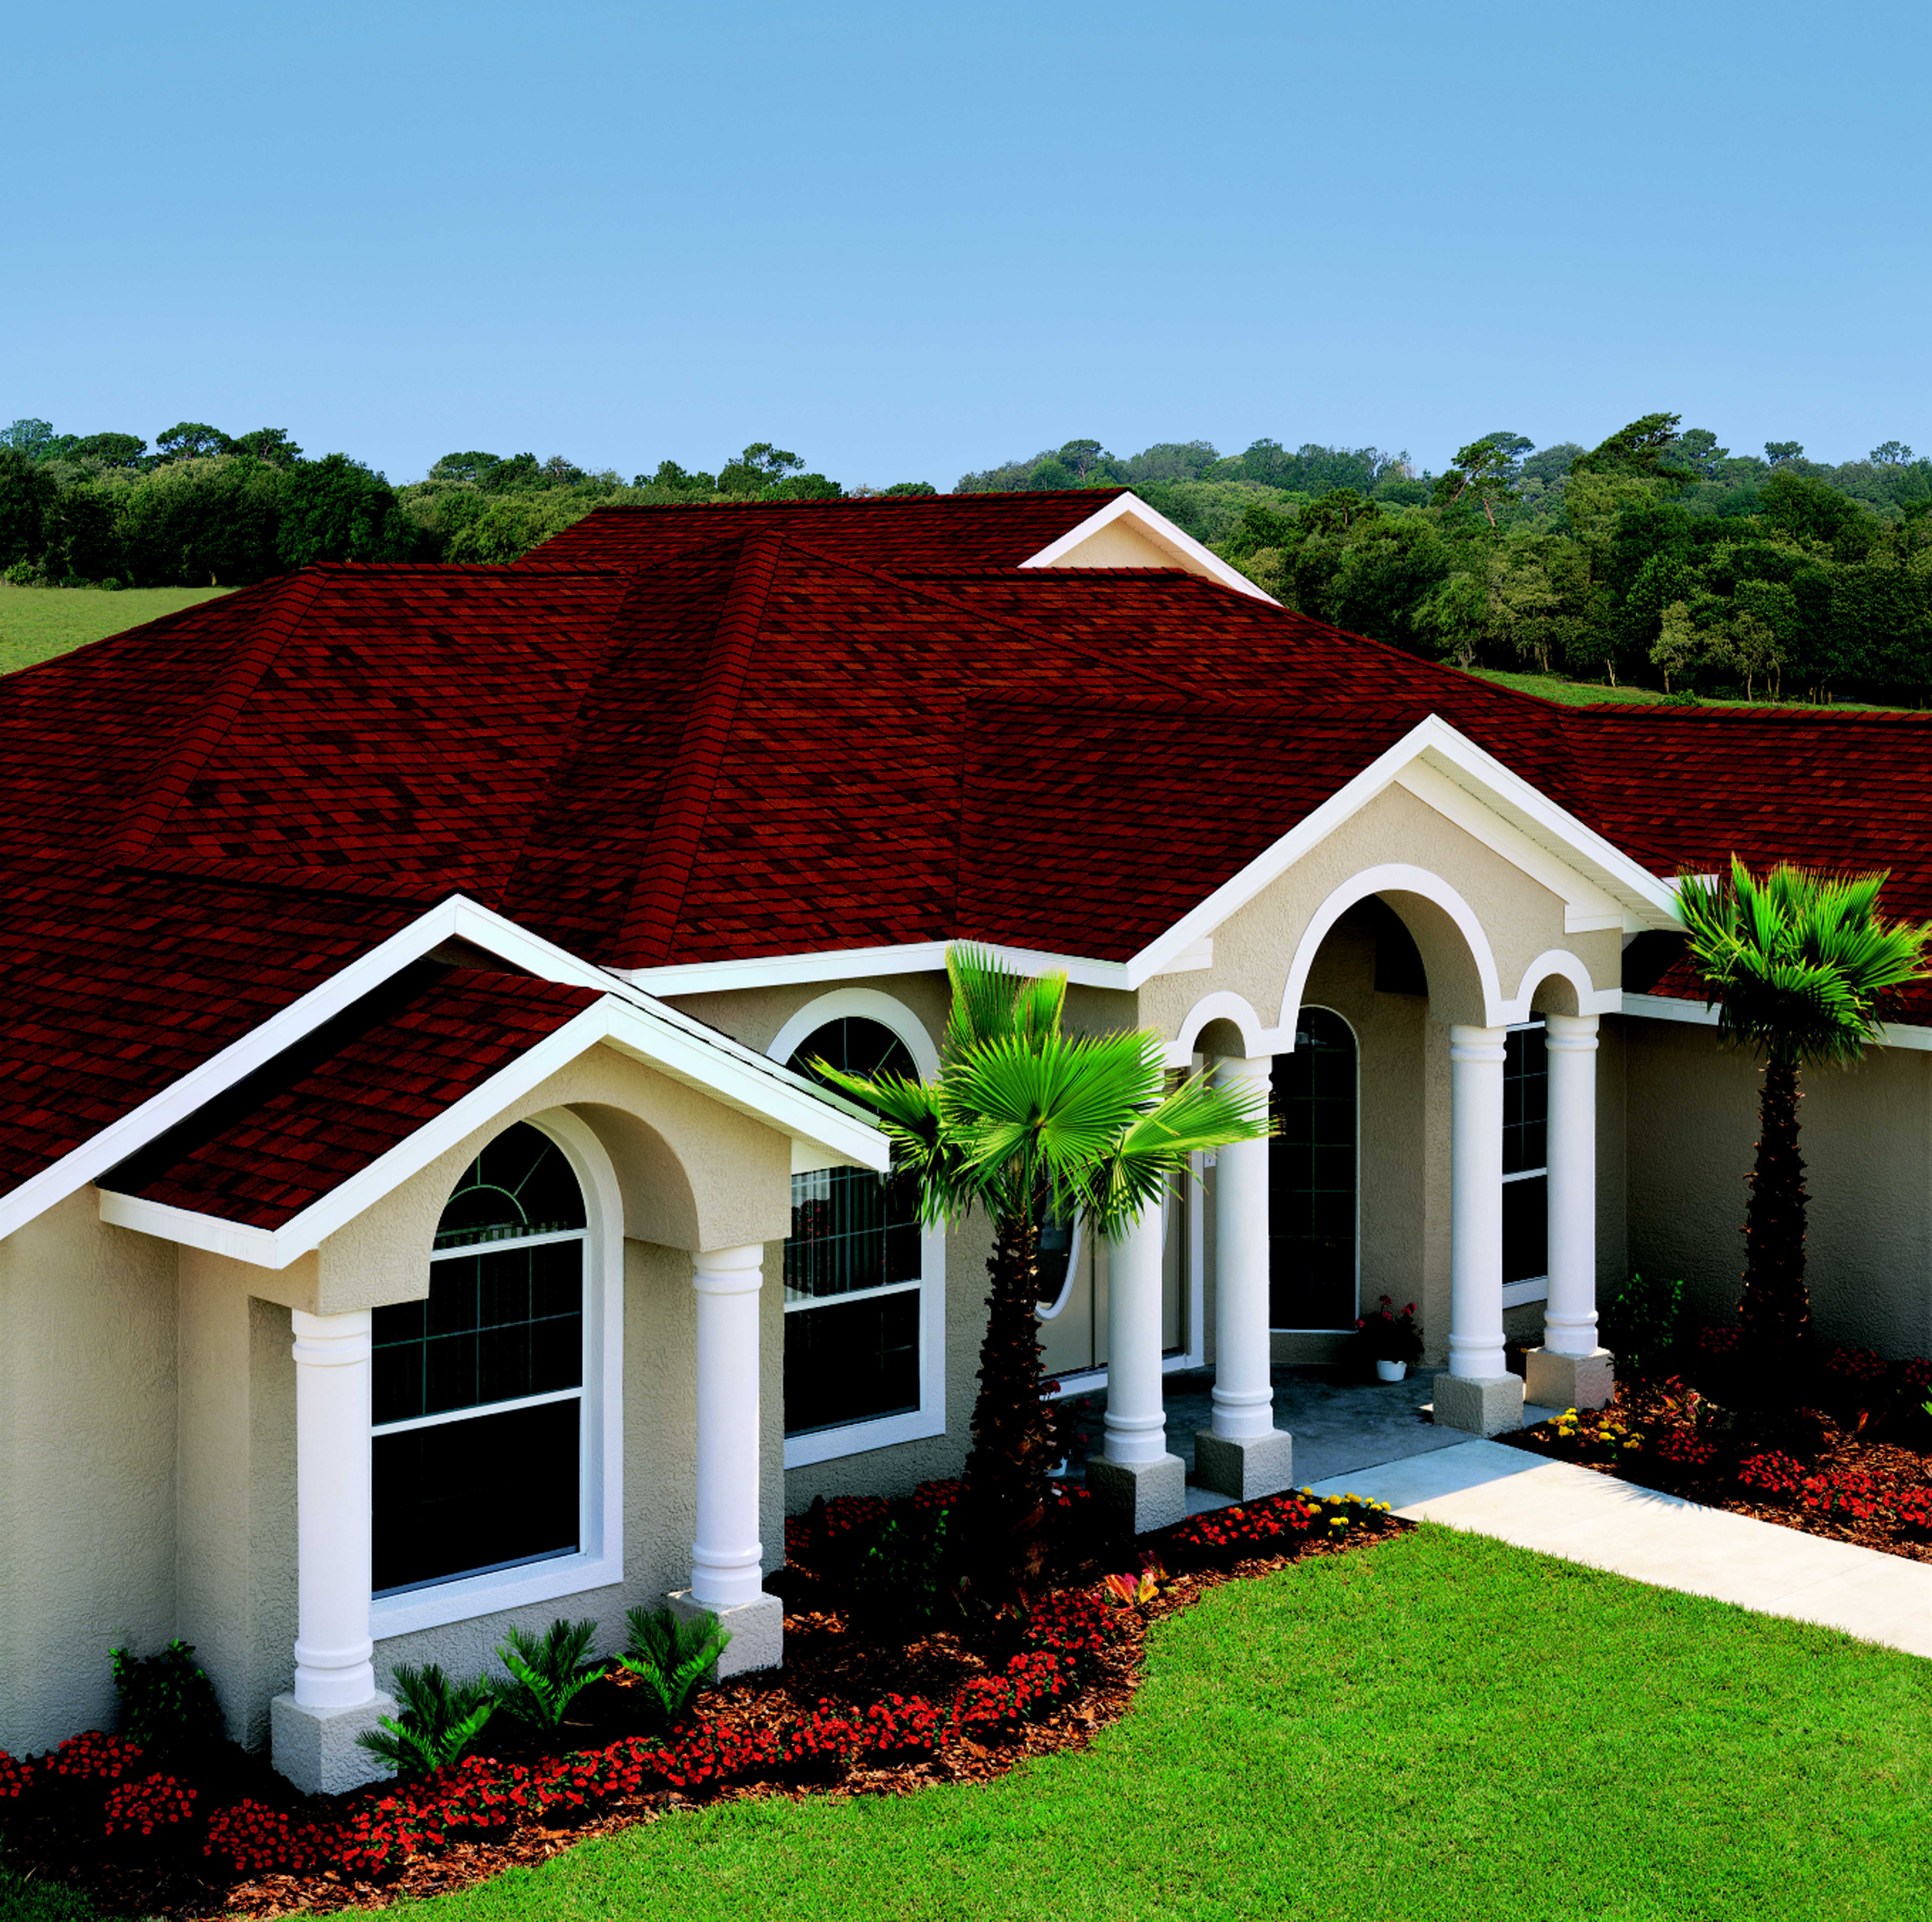 Different Roof Designs Trends With Beautiful Picture Of Roofing ...